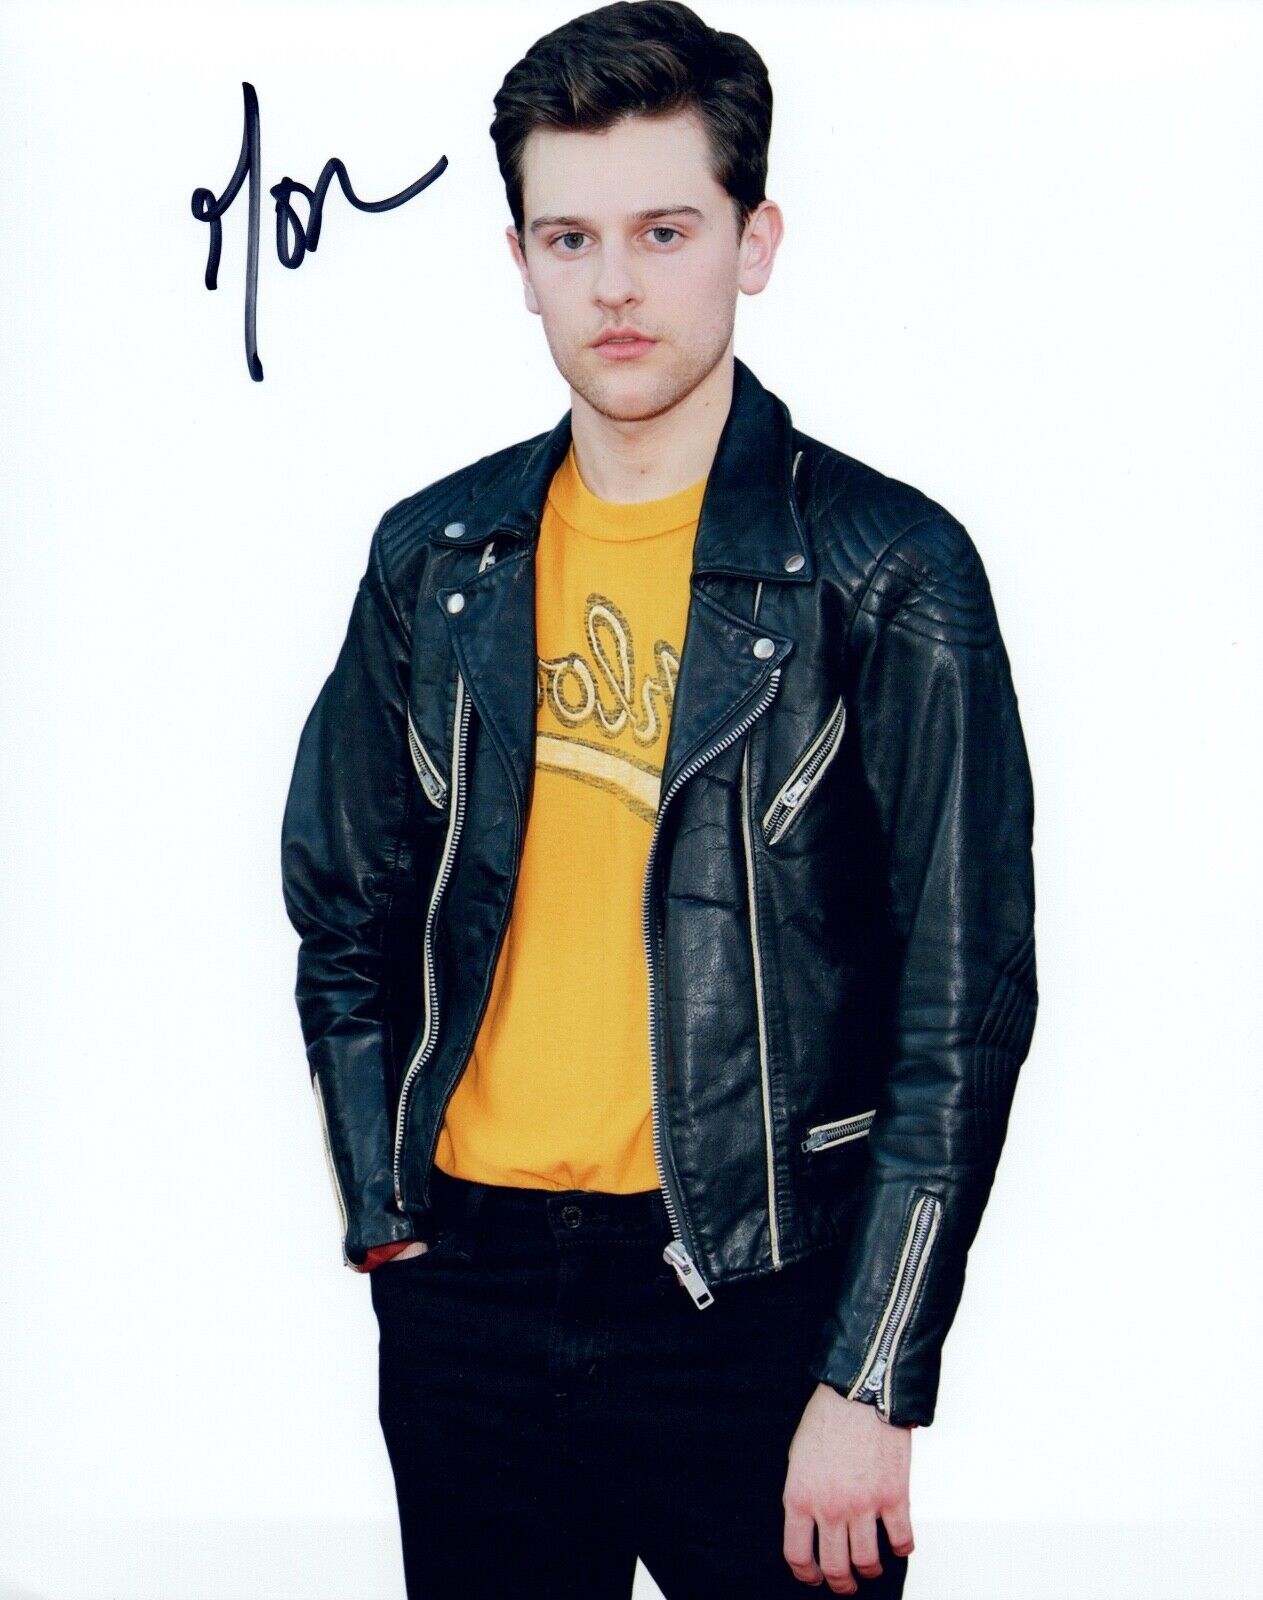 Travis Tope Signed Autographed 8x10 Photo Poster painting Handsome Actor AMERICAN VANDAL COA